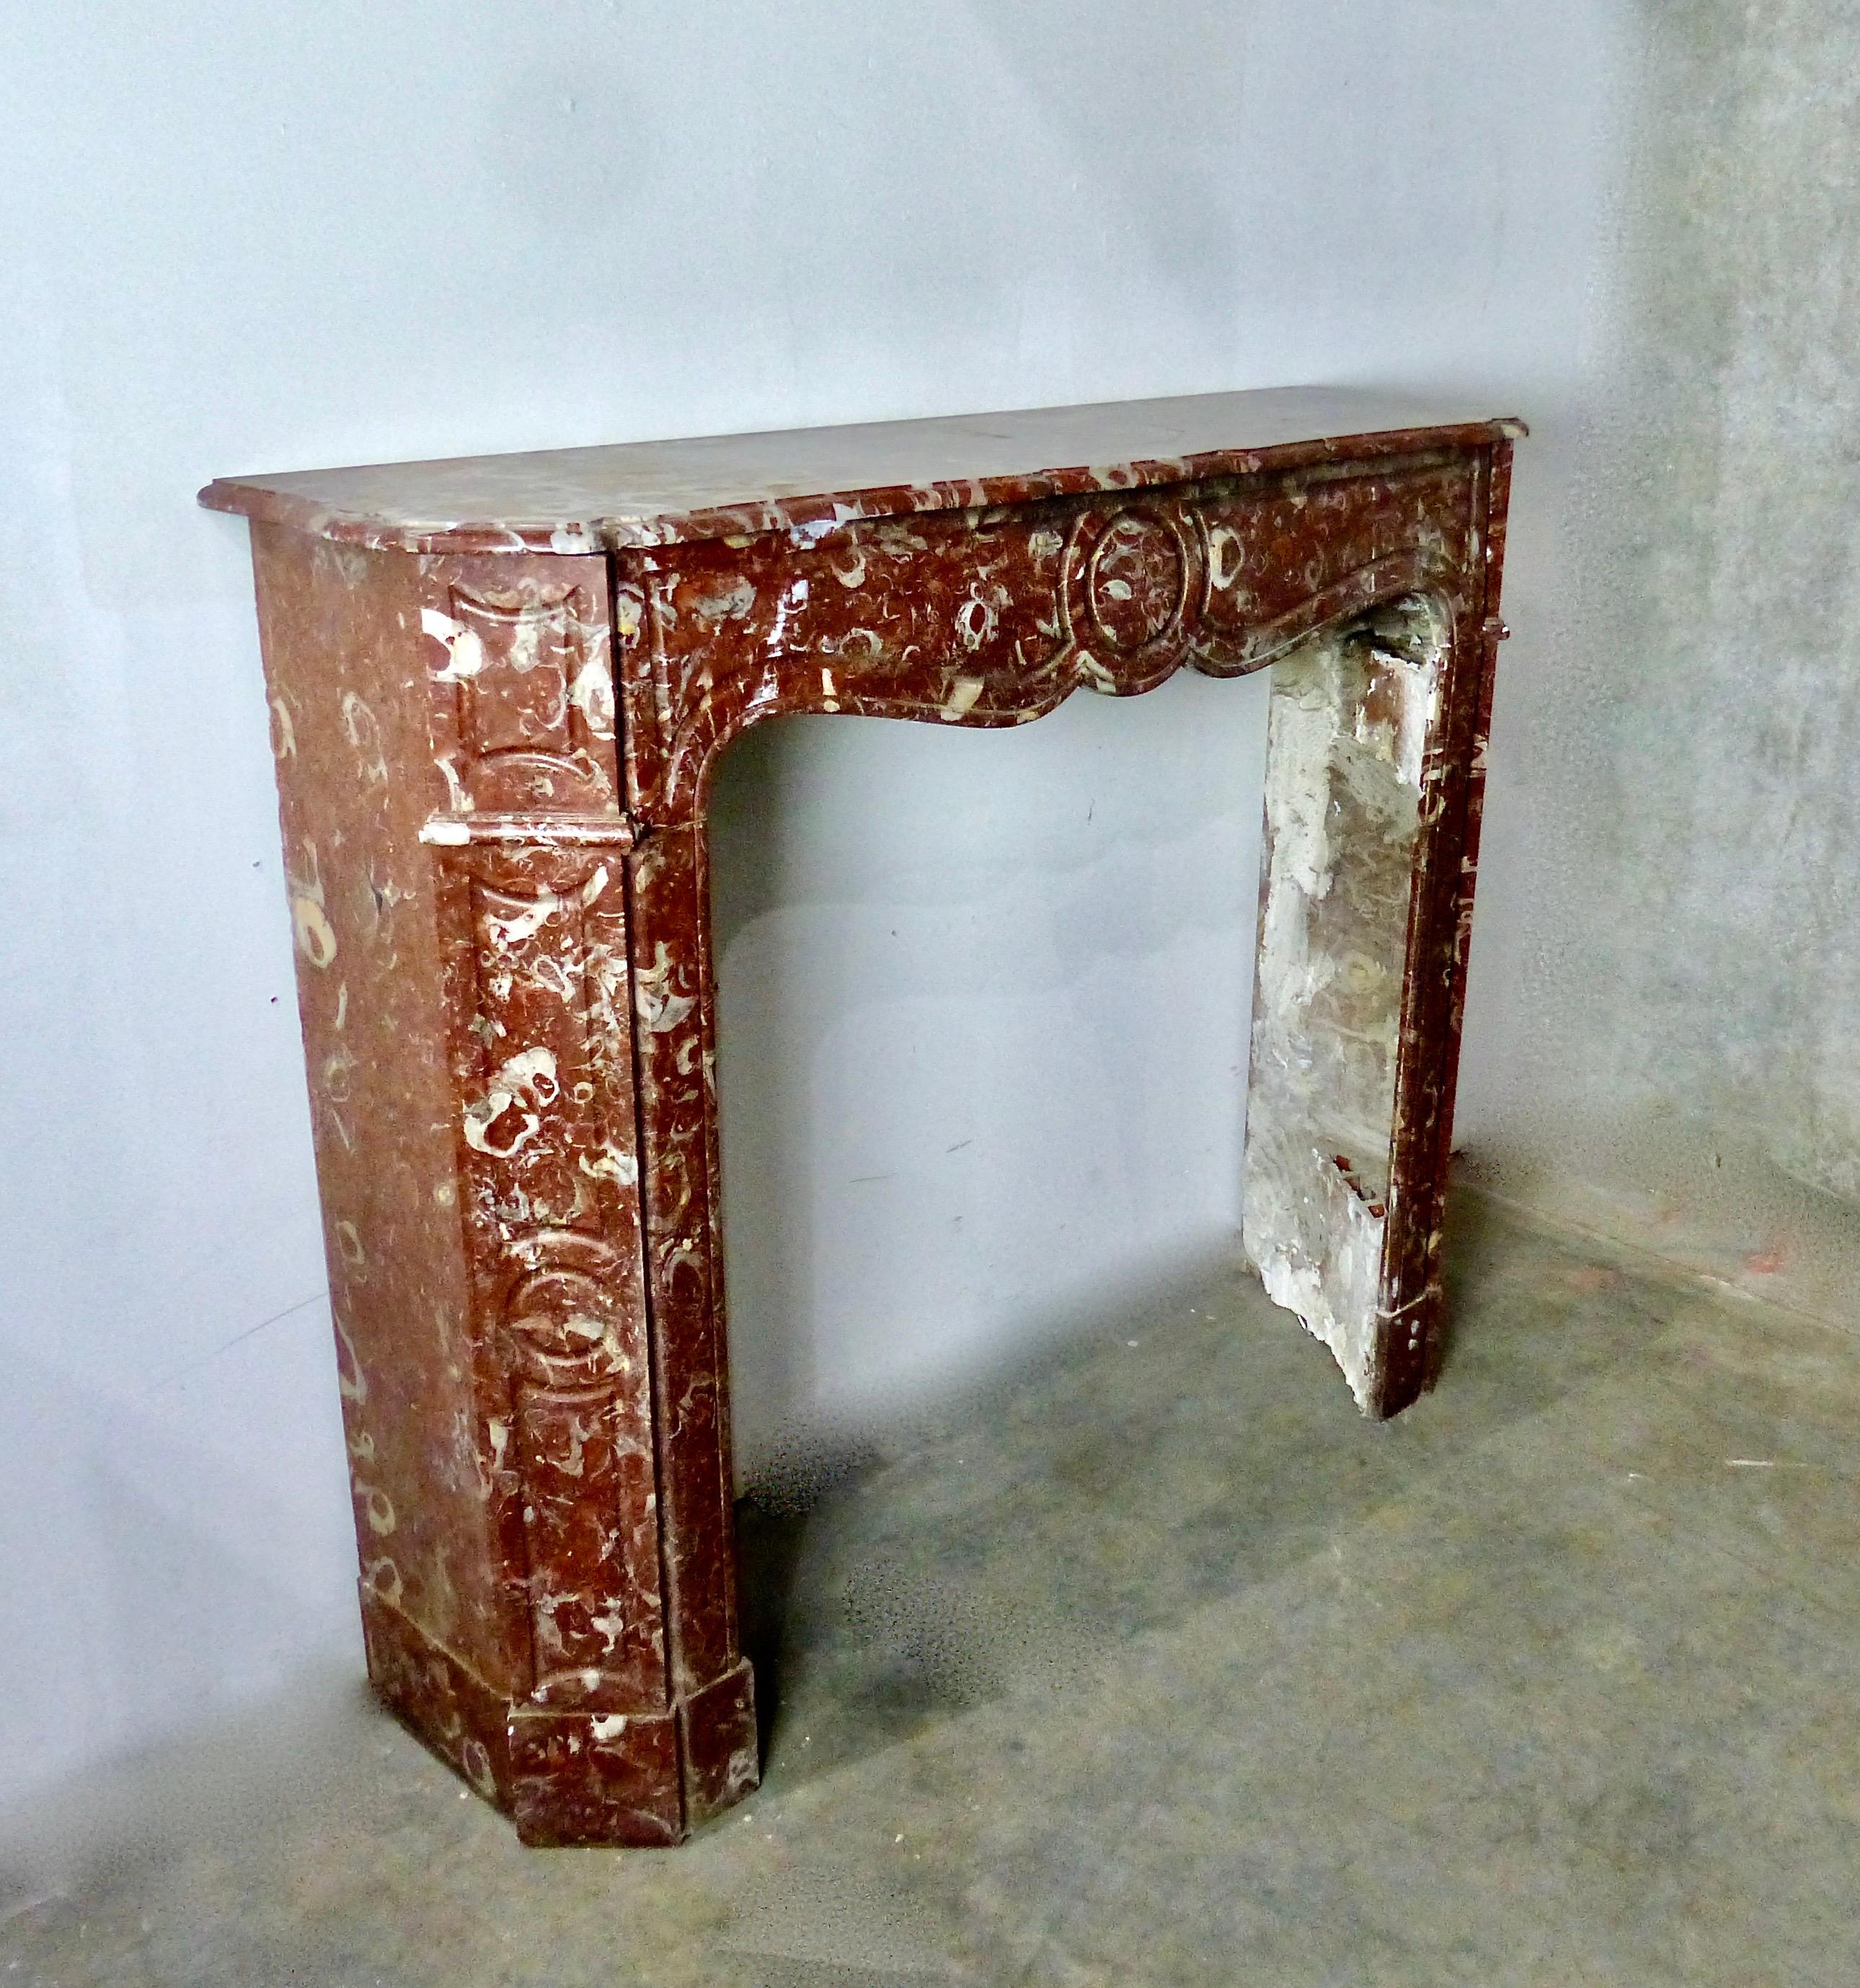 This simple yet elegant Belgium marble fireplace surround/mantel was found in Paris in the 1980s but dates from the 19th century.
Perfect salvaged condition.
History and details.
The fireplace known as Pompadour, is inspired from the sinuous